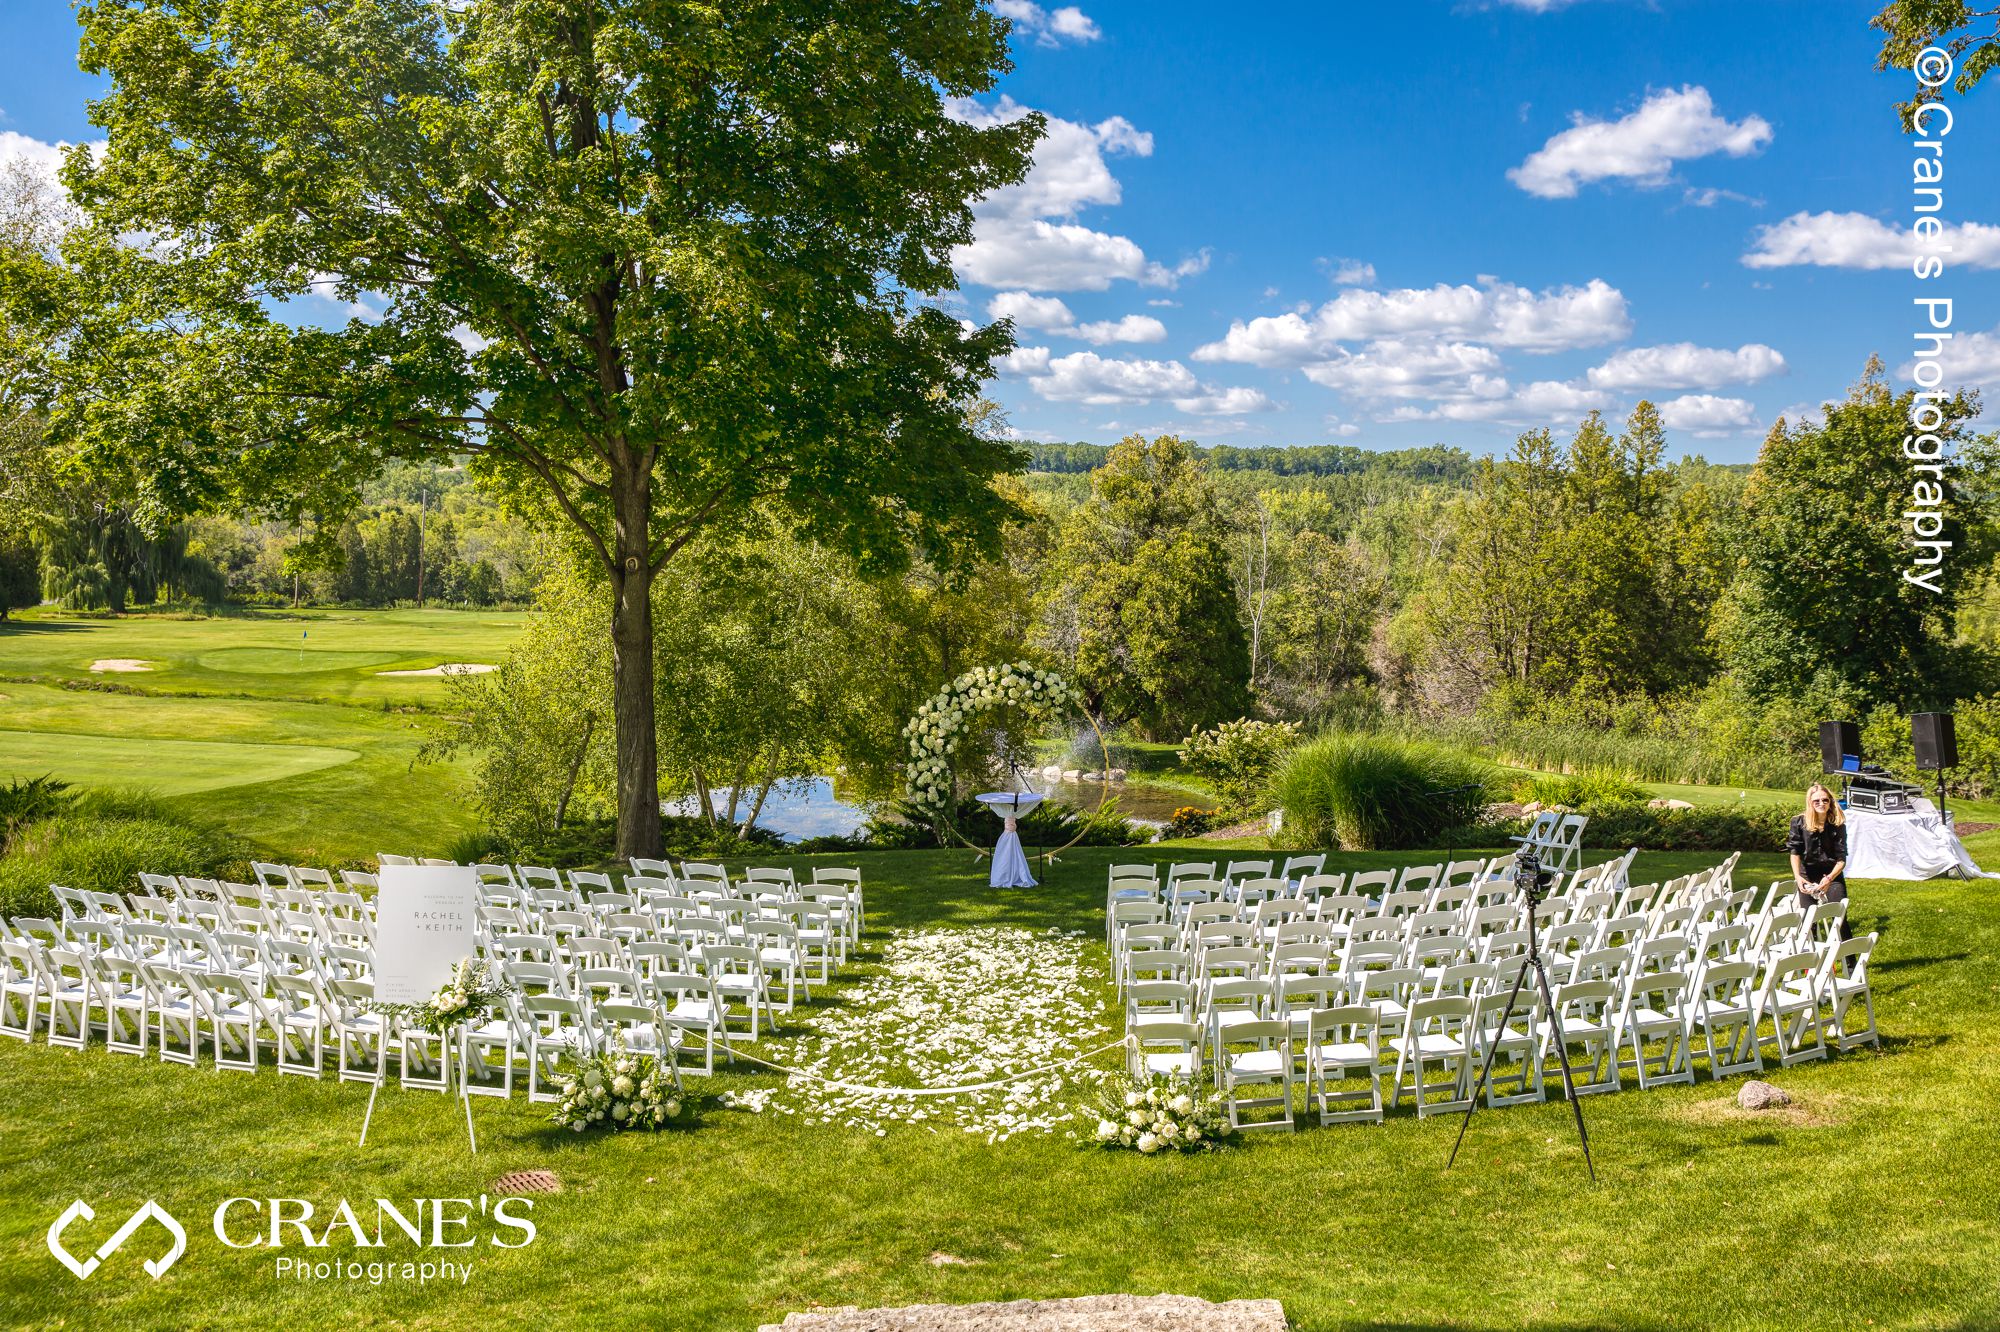 An outdoor wedding ceremony at Big Foot Country Club